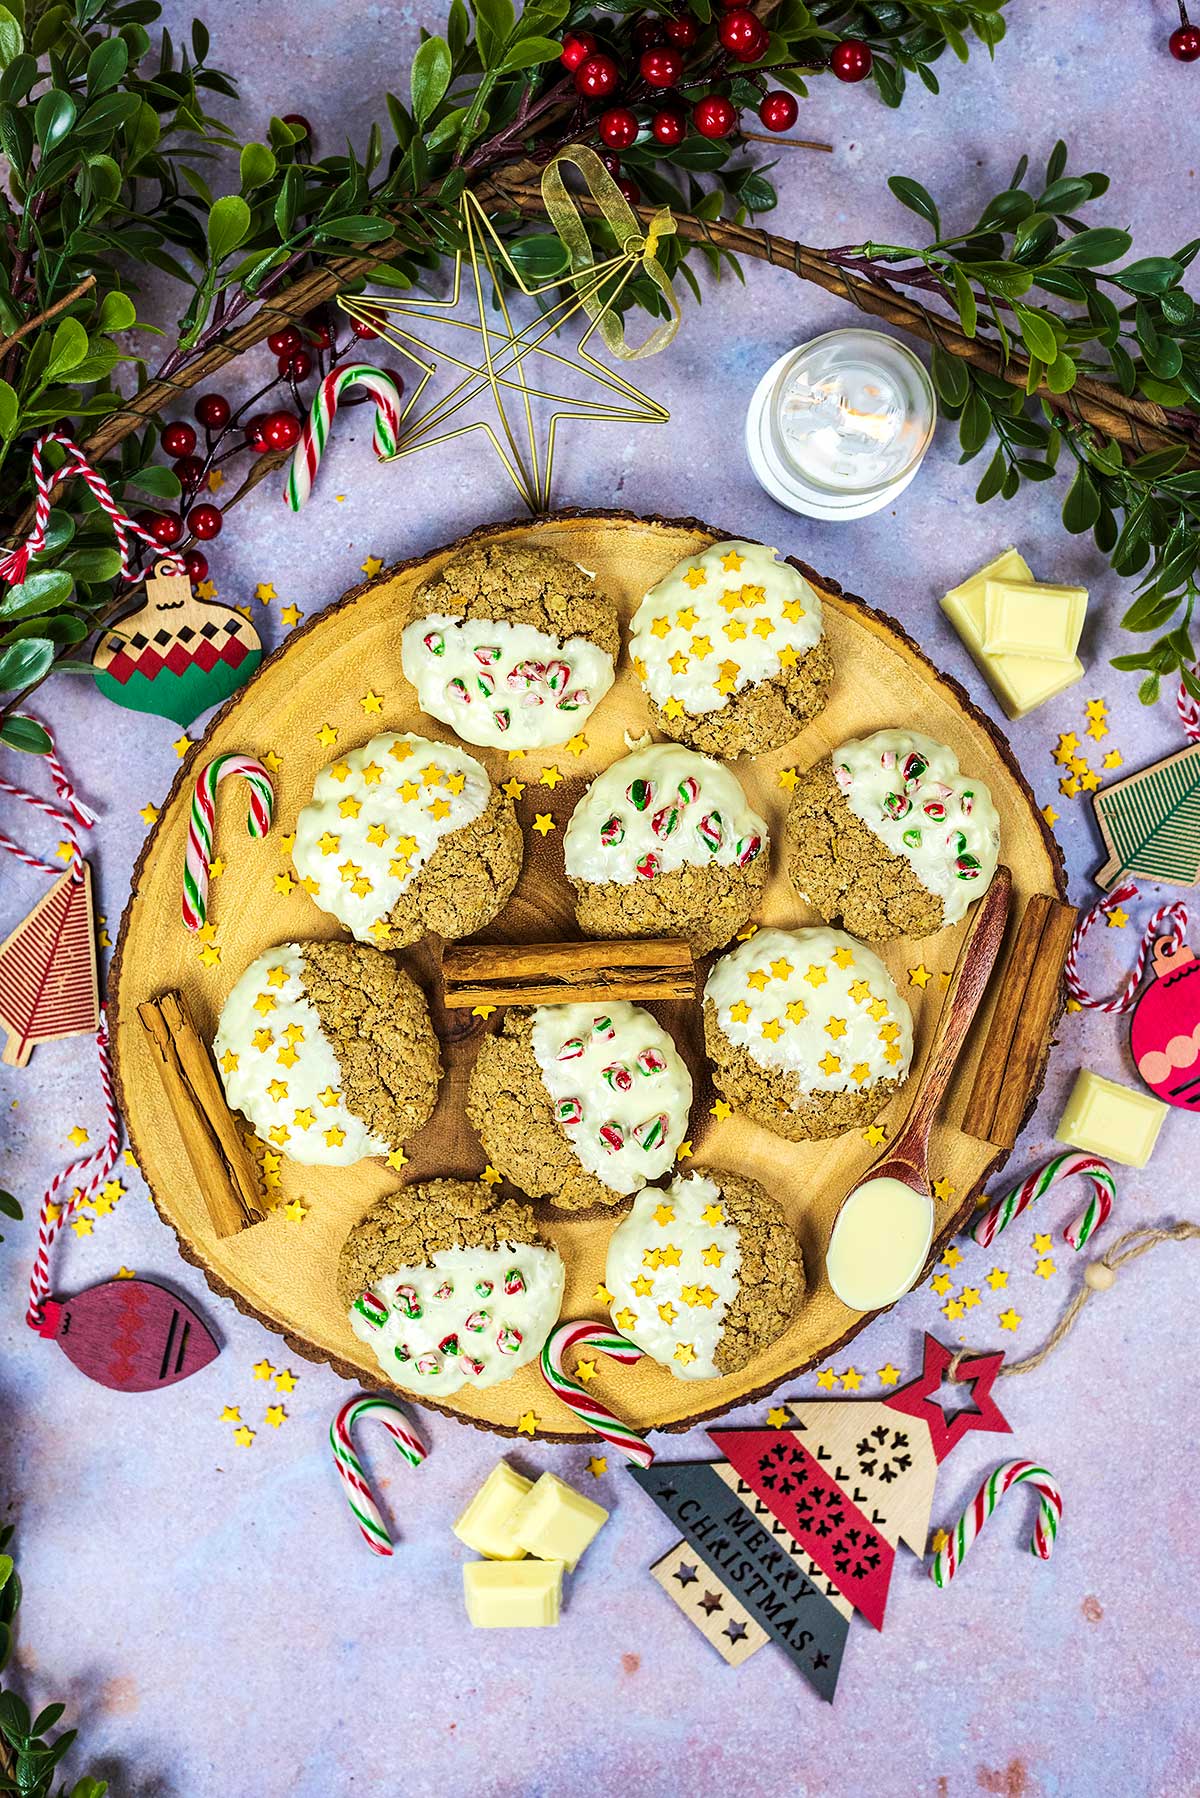 Ten decorated cookies on a round wooden board surrounded by Christmas decorations.